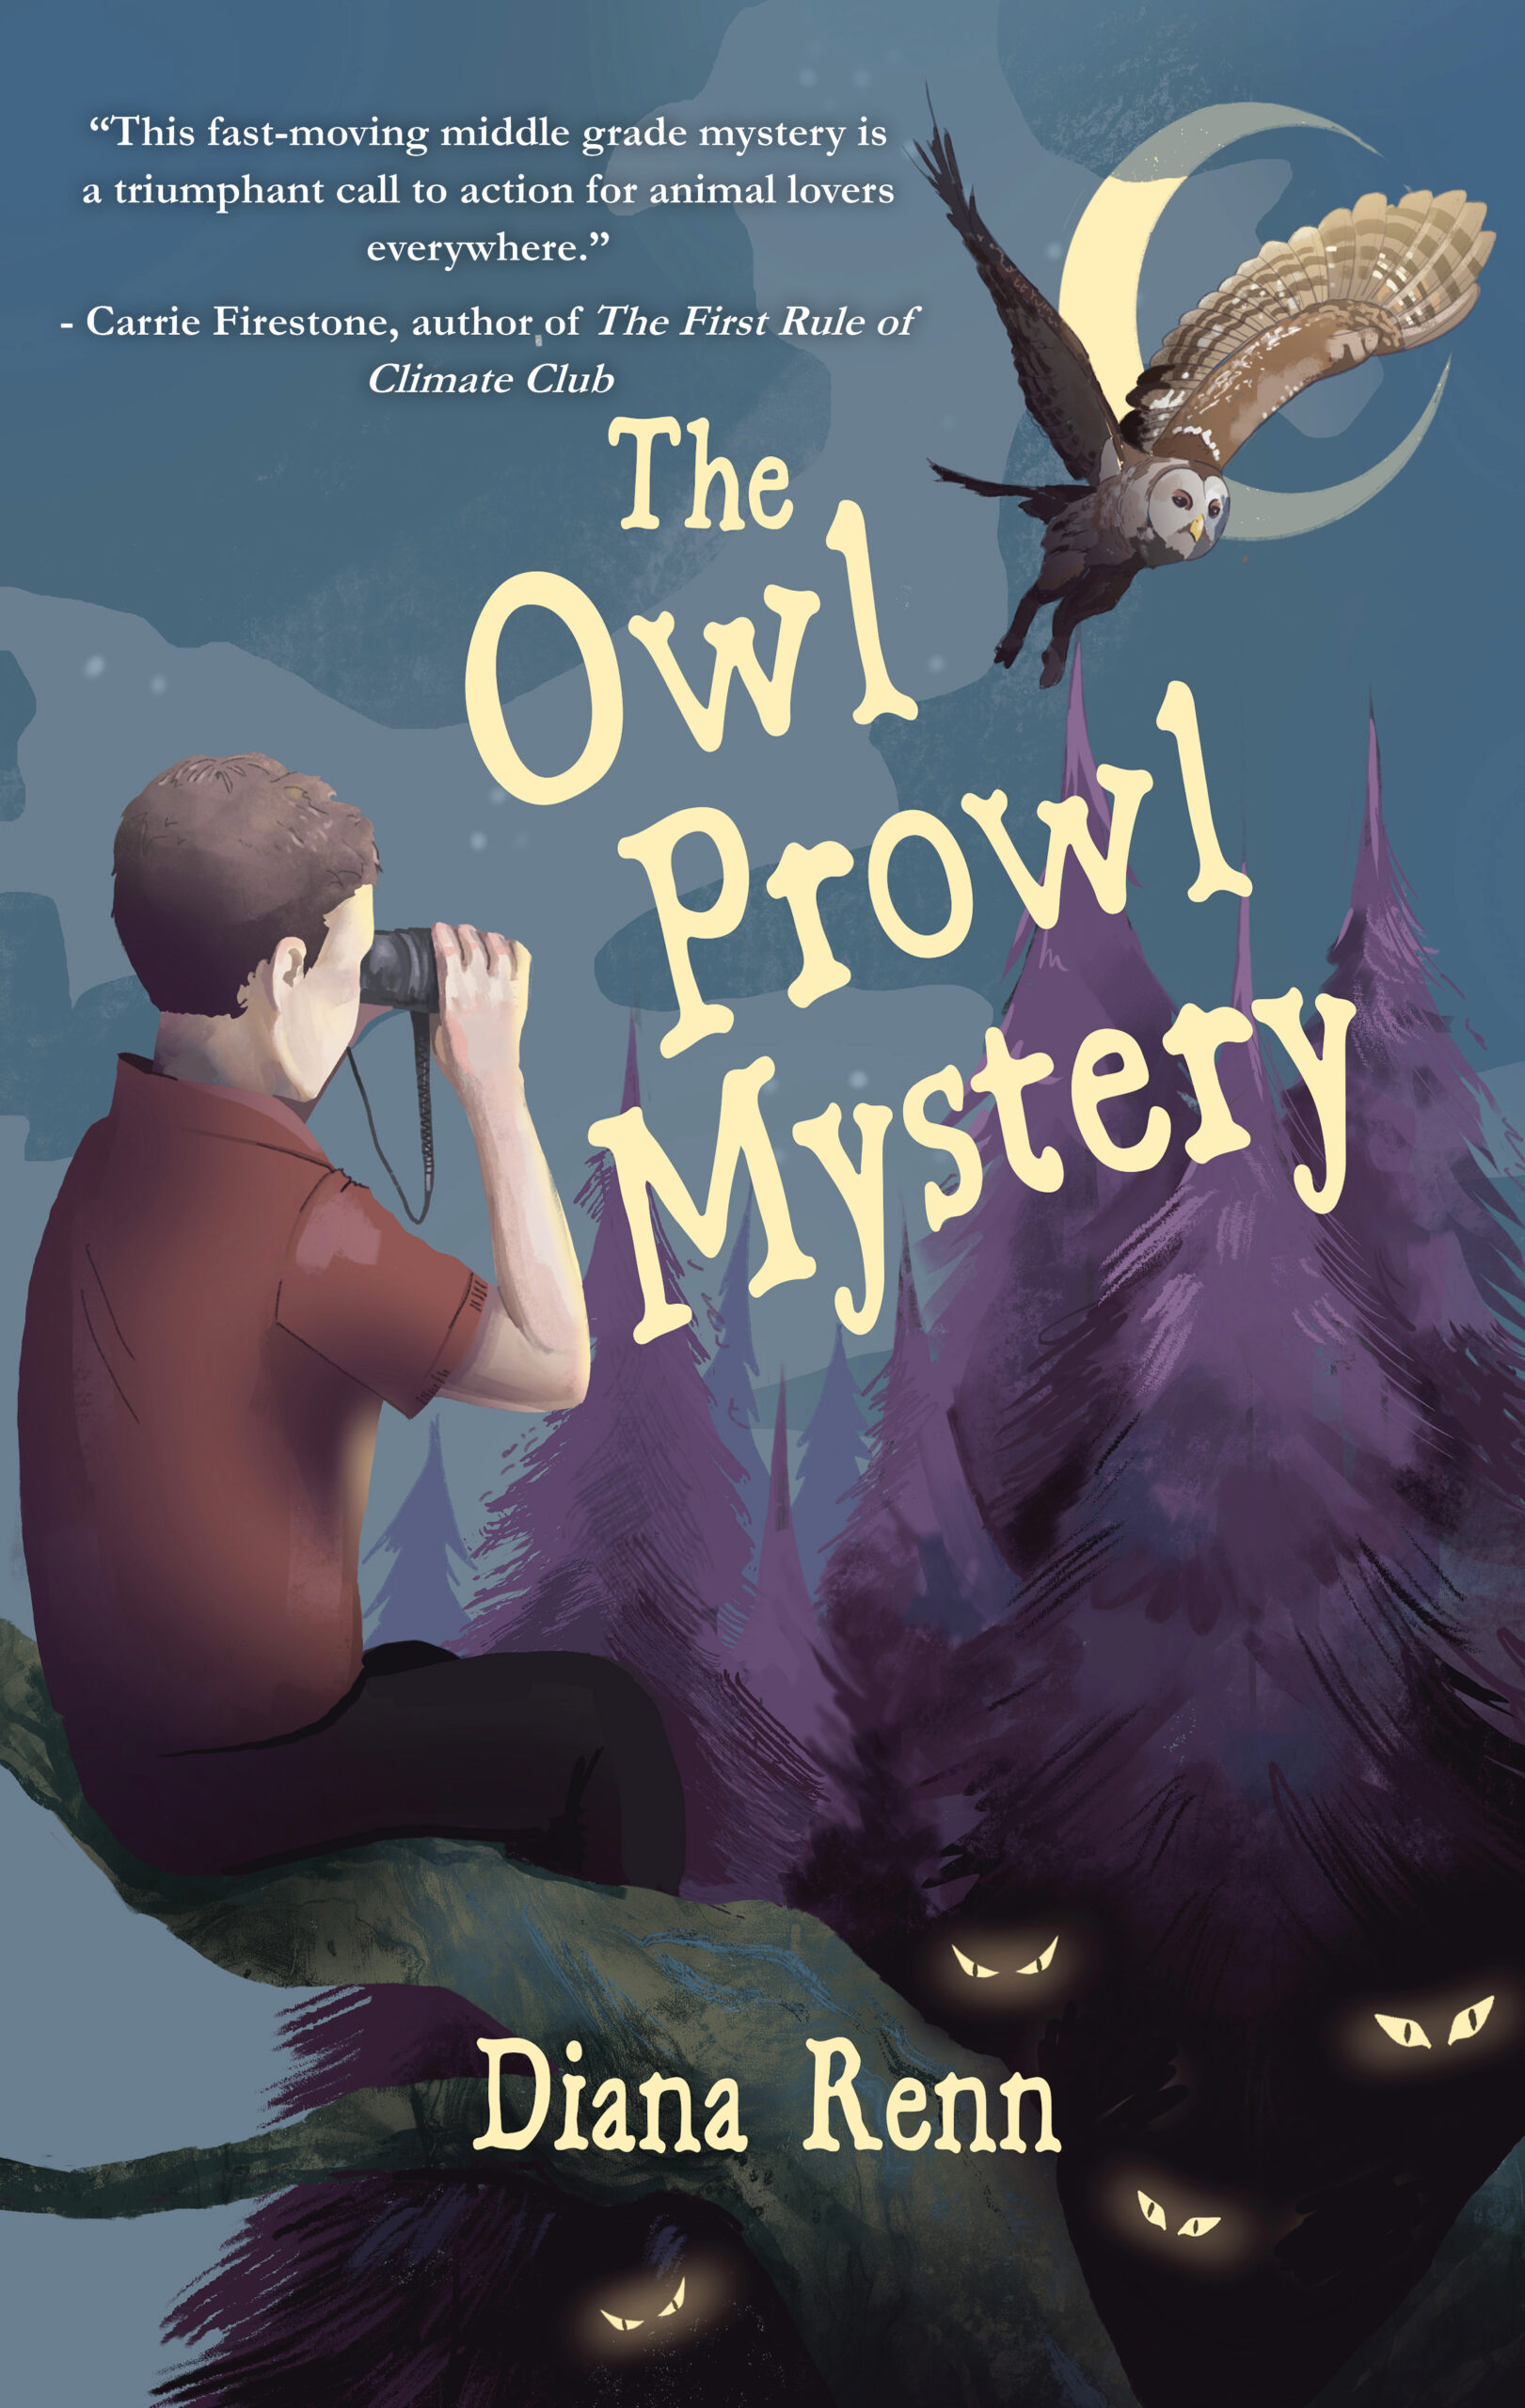 COVER REVEAL for THE OWL PROWL MYSTERY and Why Tweens Make Great Eco Sleuths, a guest post by Diana Renn